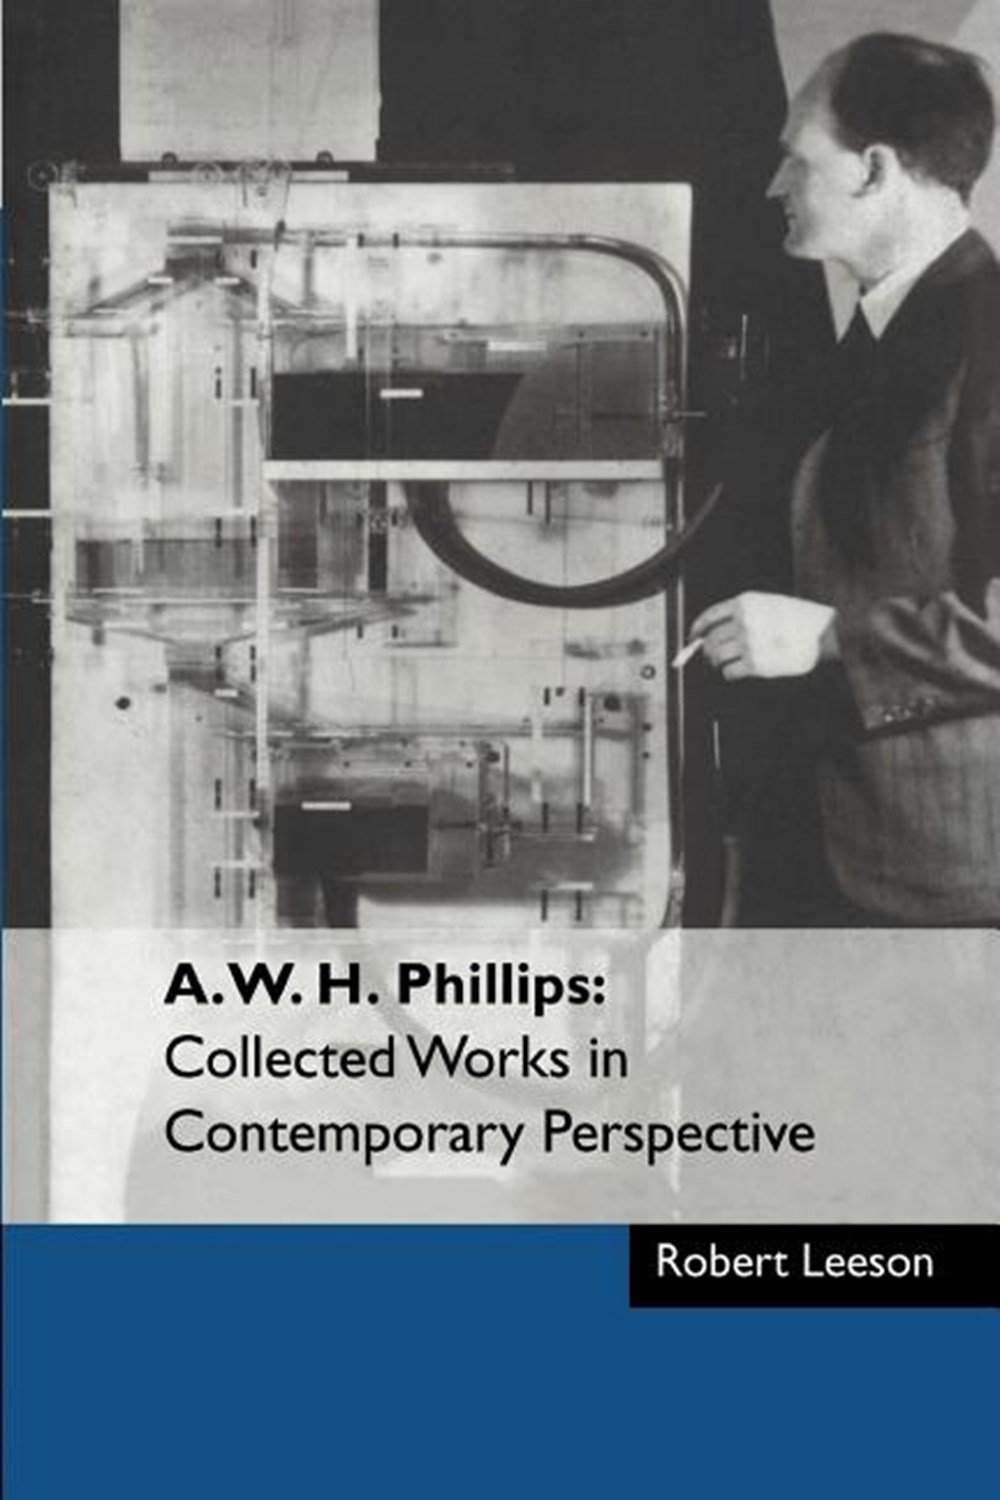 A. W. H. Phillips Collected Works in Contemporary Perspective